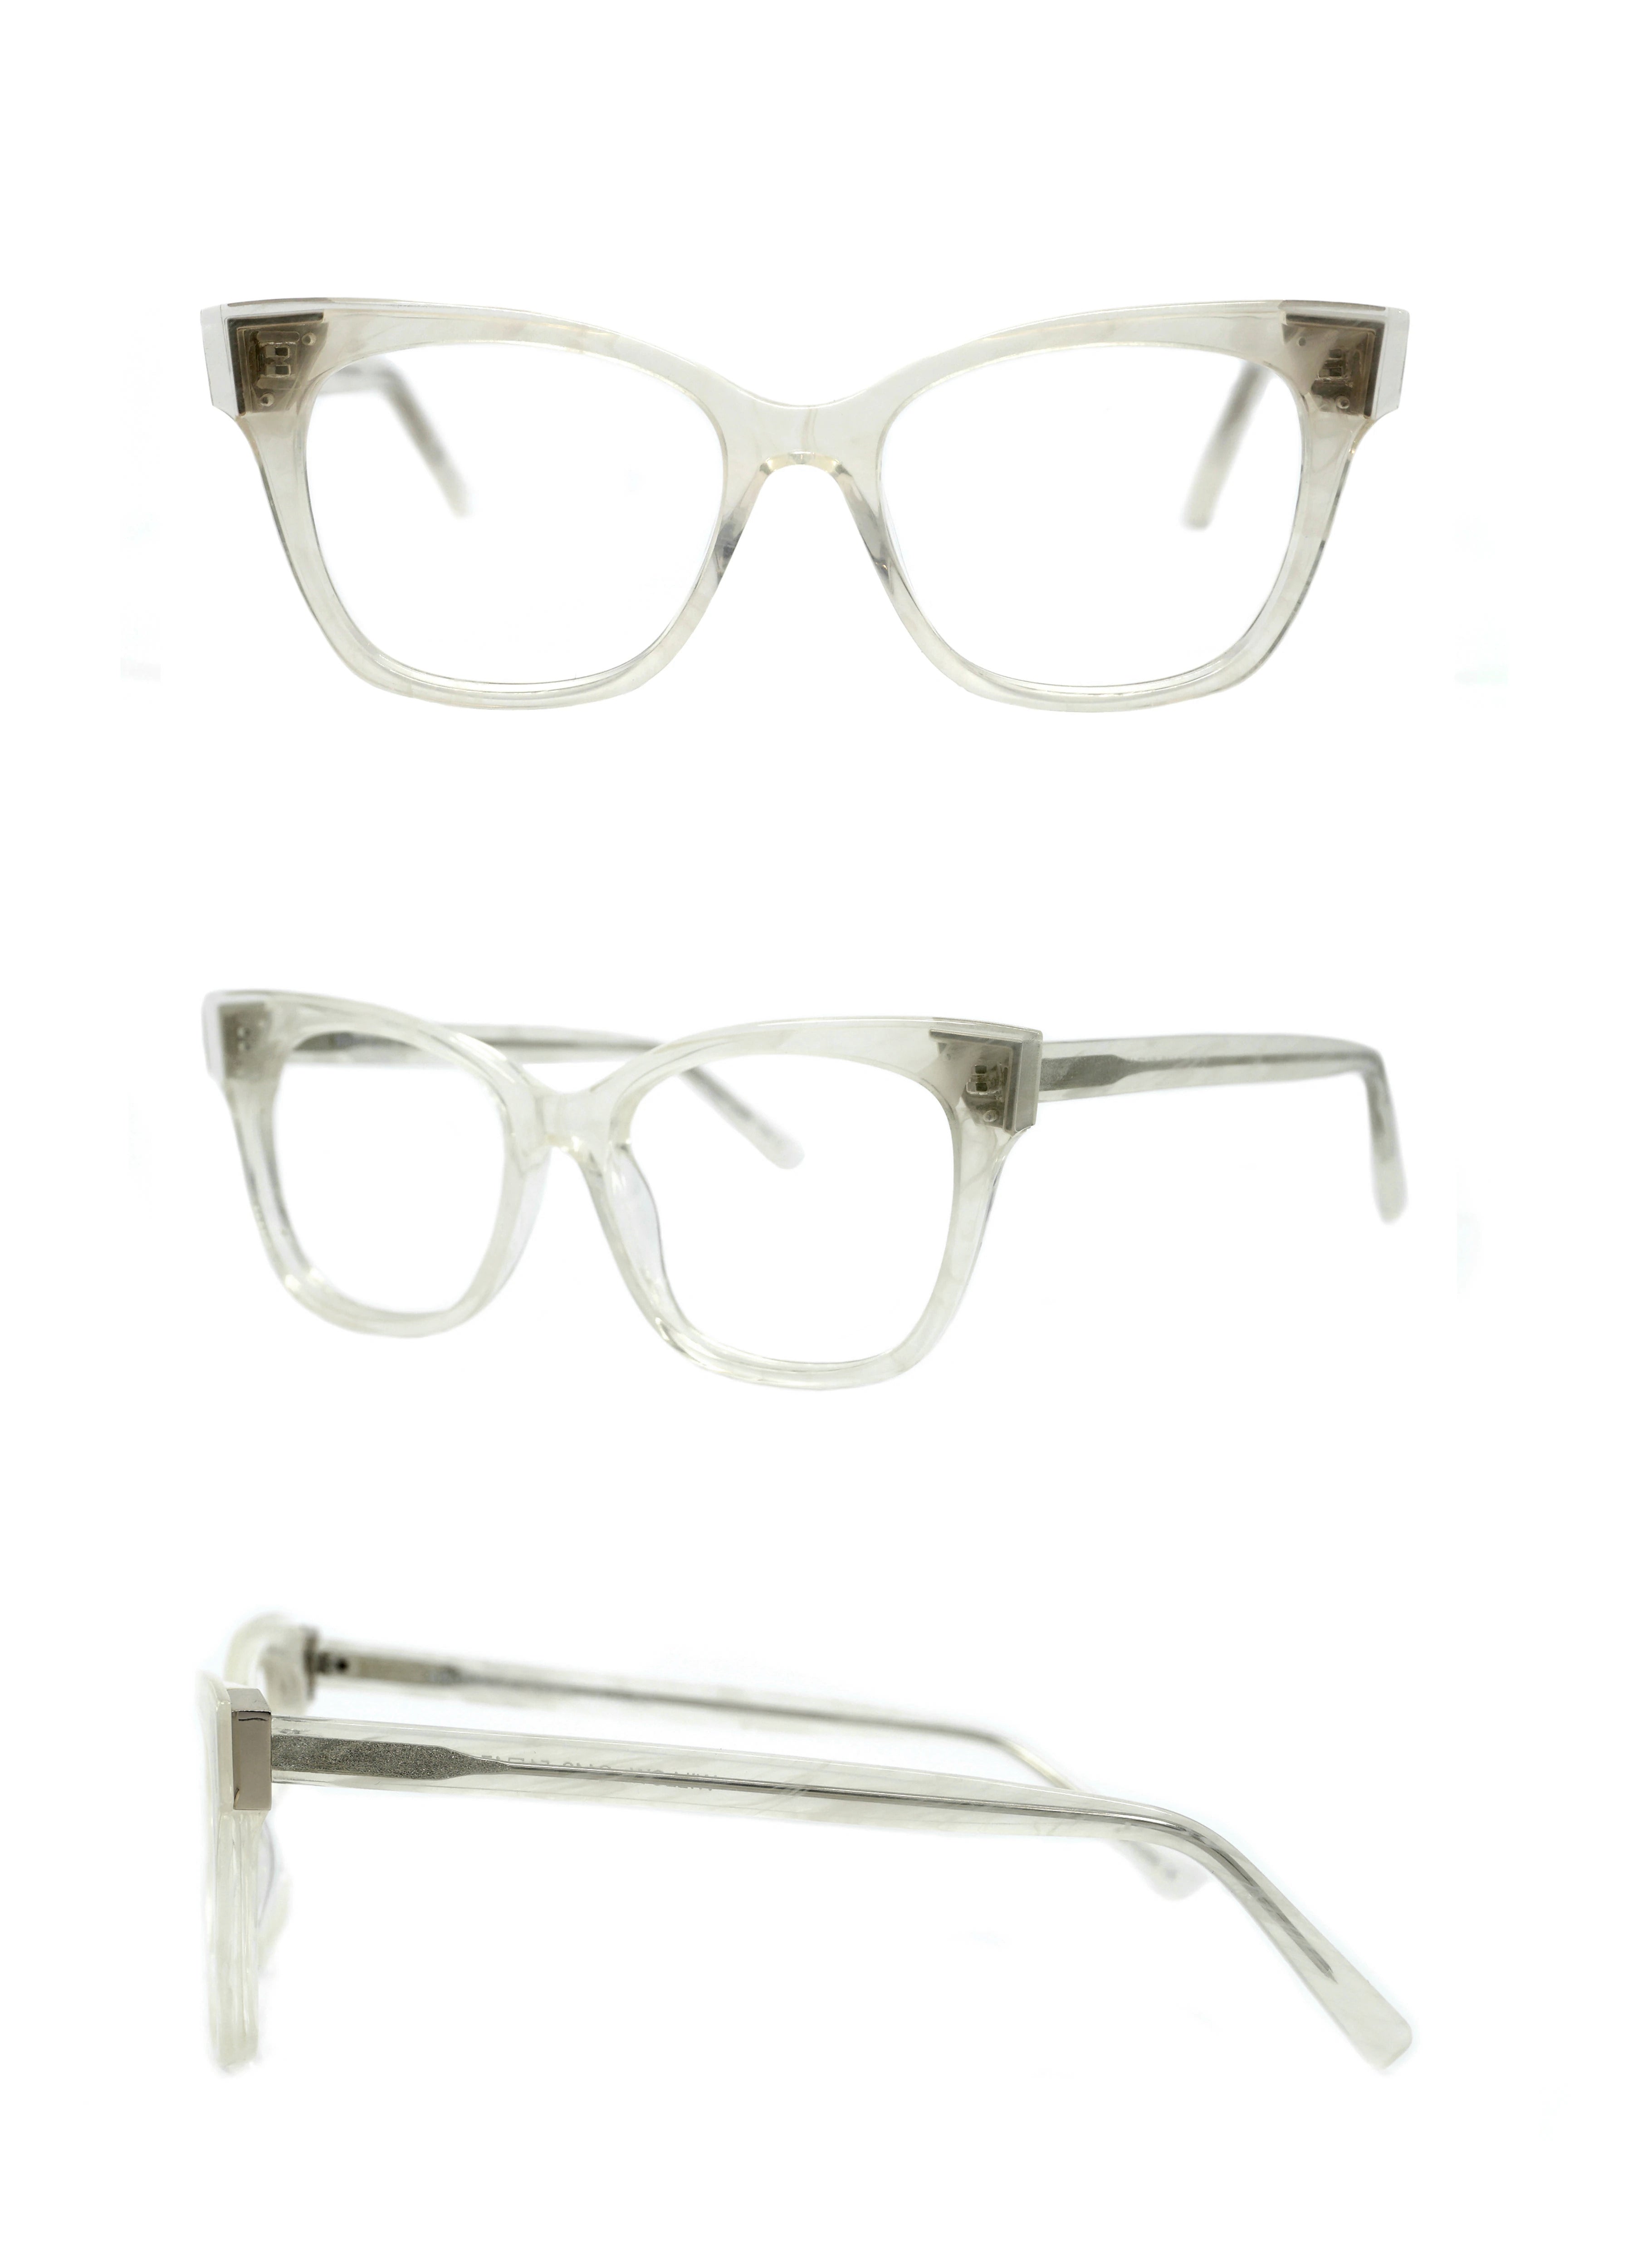 Willow | Brooklyn Spectacles